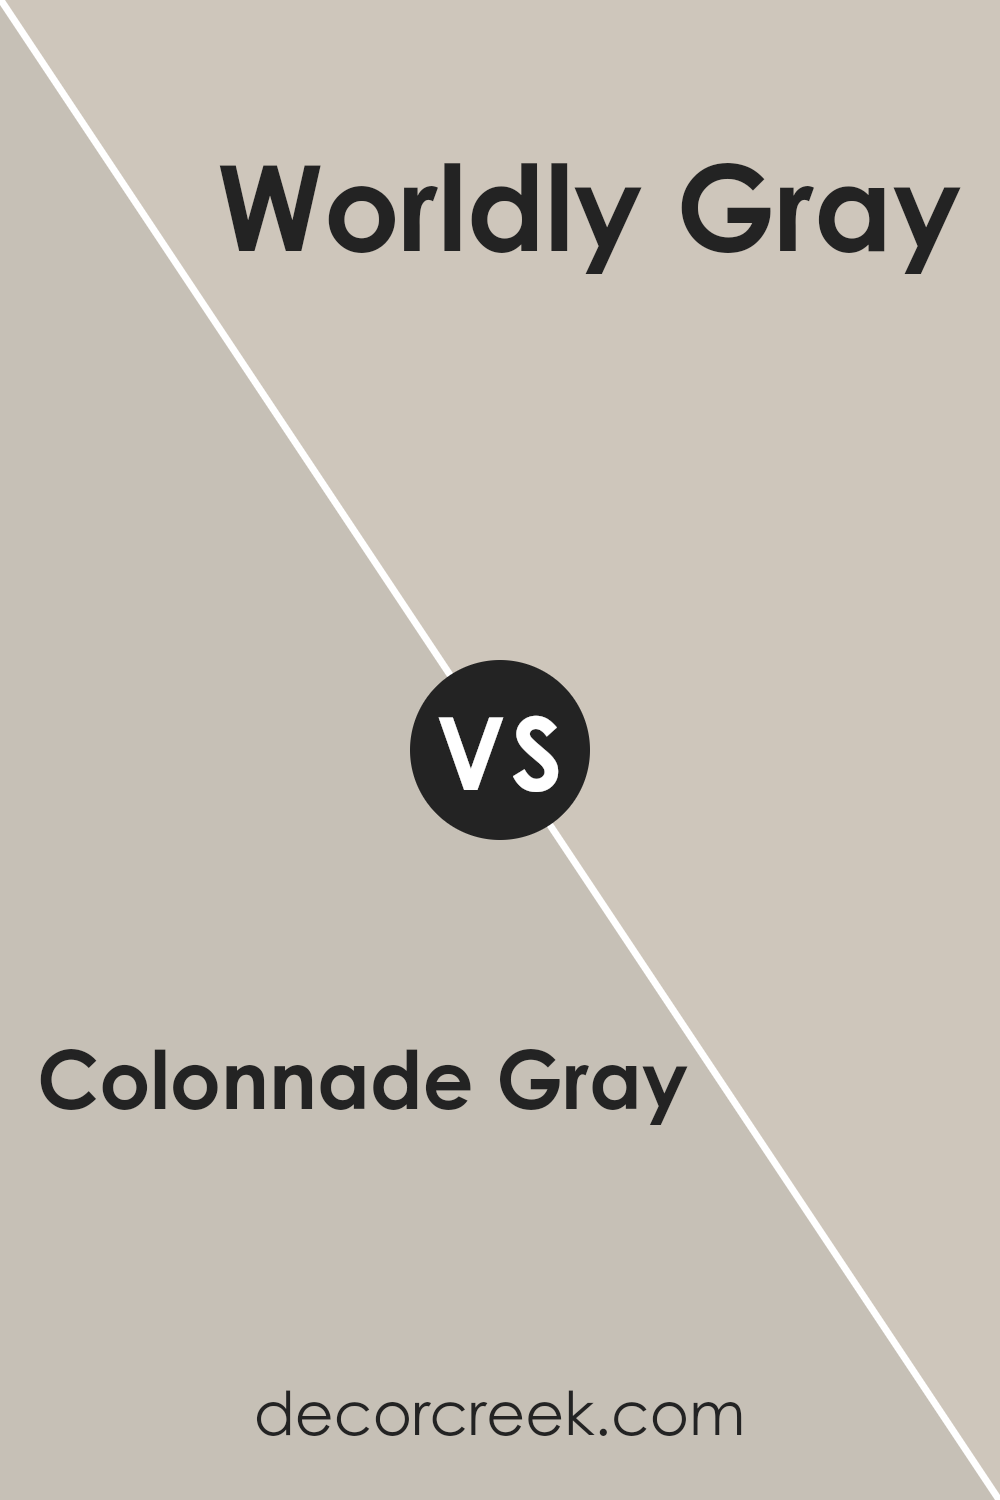 colonnade_gray_sw_7641_vs_worldly_gray_sw_7043